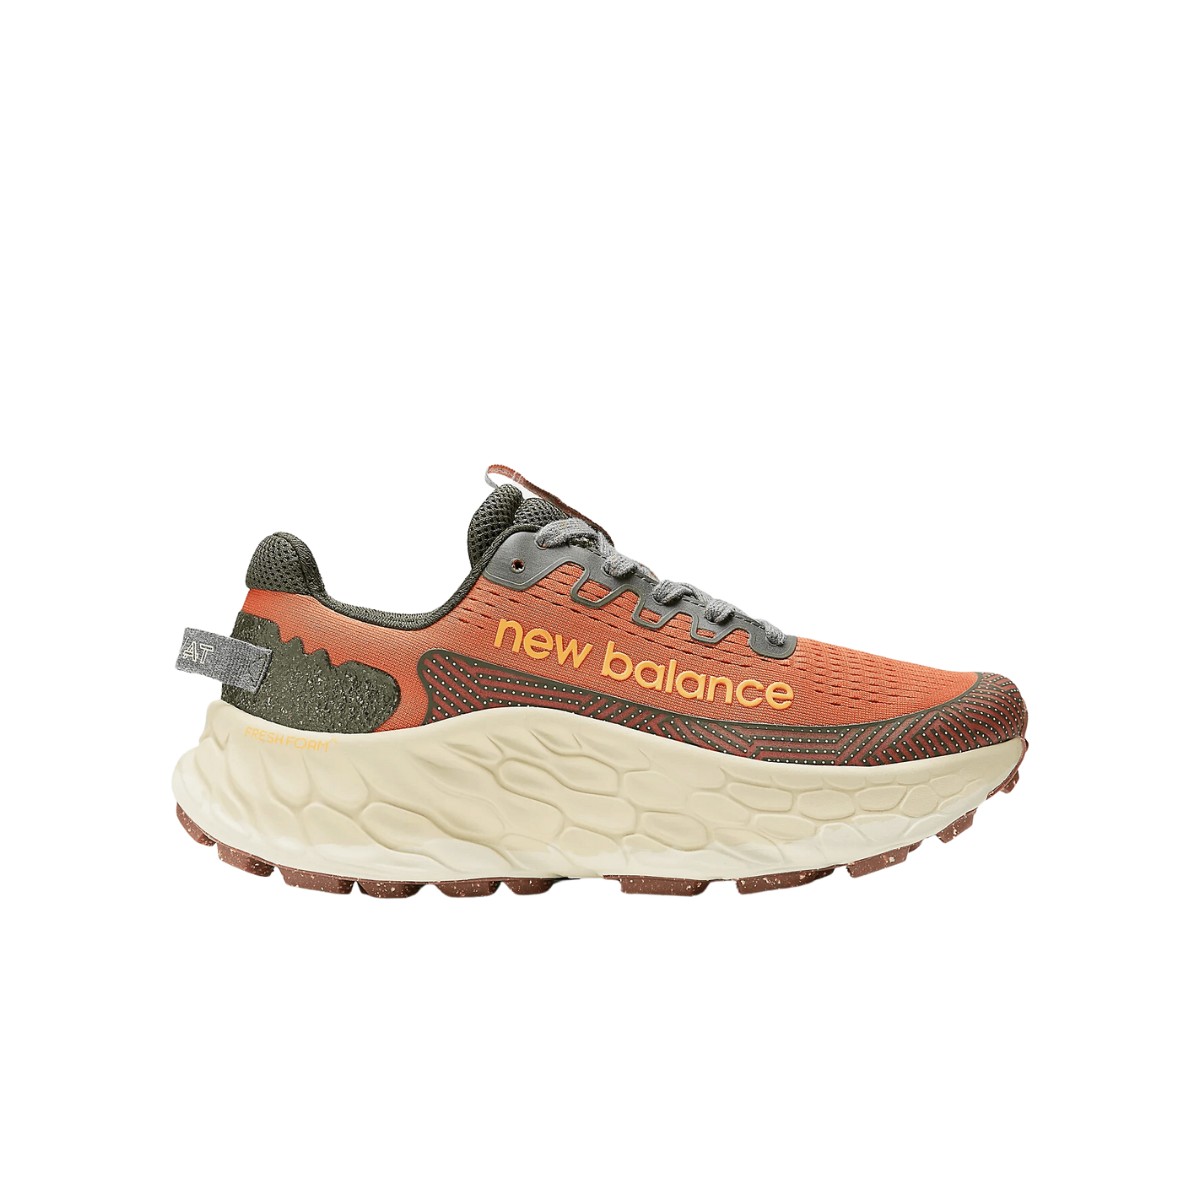 Chaussures New Balance Fresh Foam X More Trail v3 Orange Gris AW23, Taille 42 - EUR